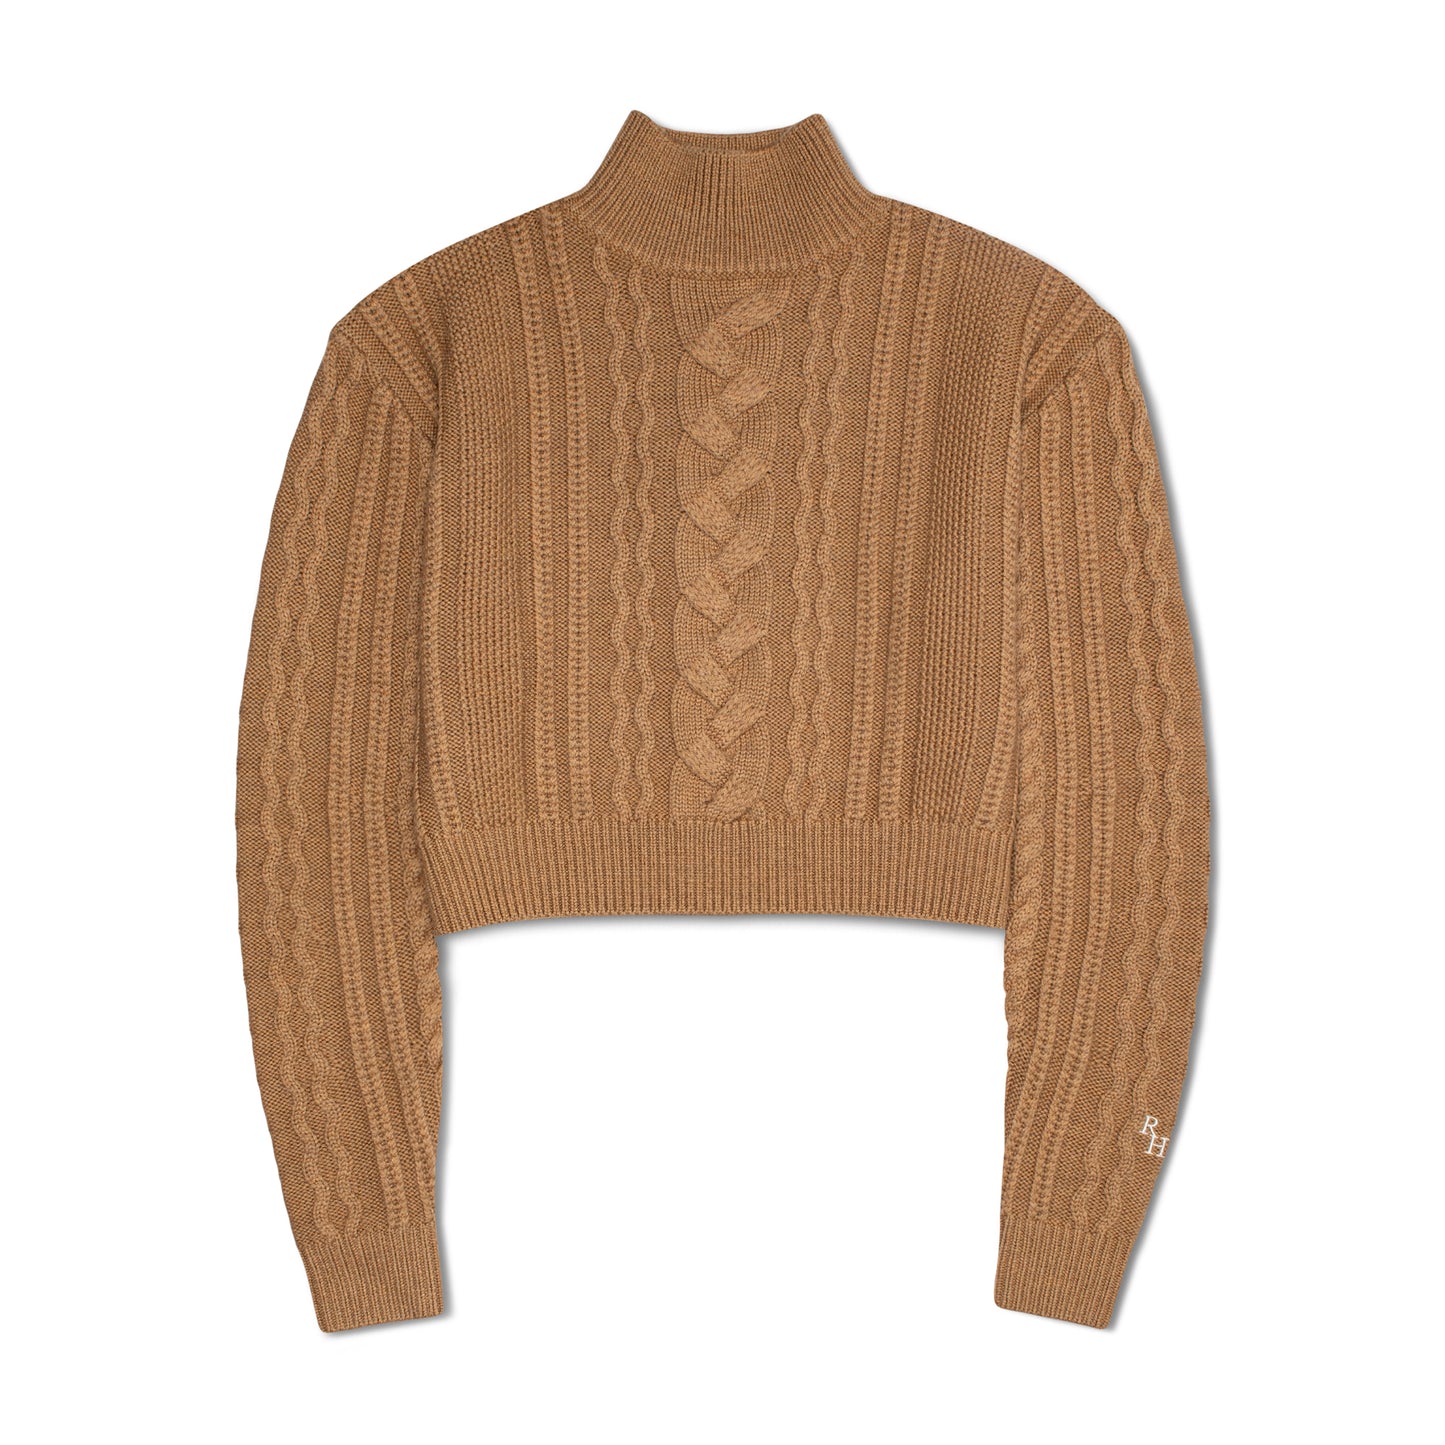 Dallas Cable Knit Turtleneck Sweater in Camel